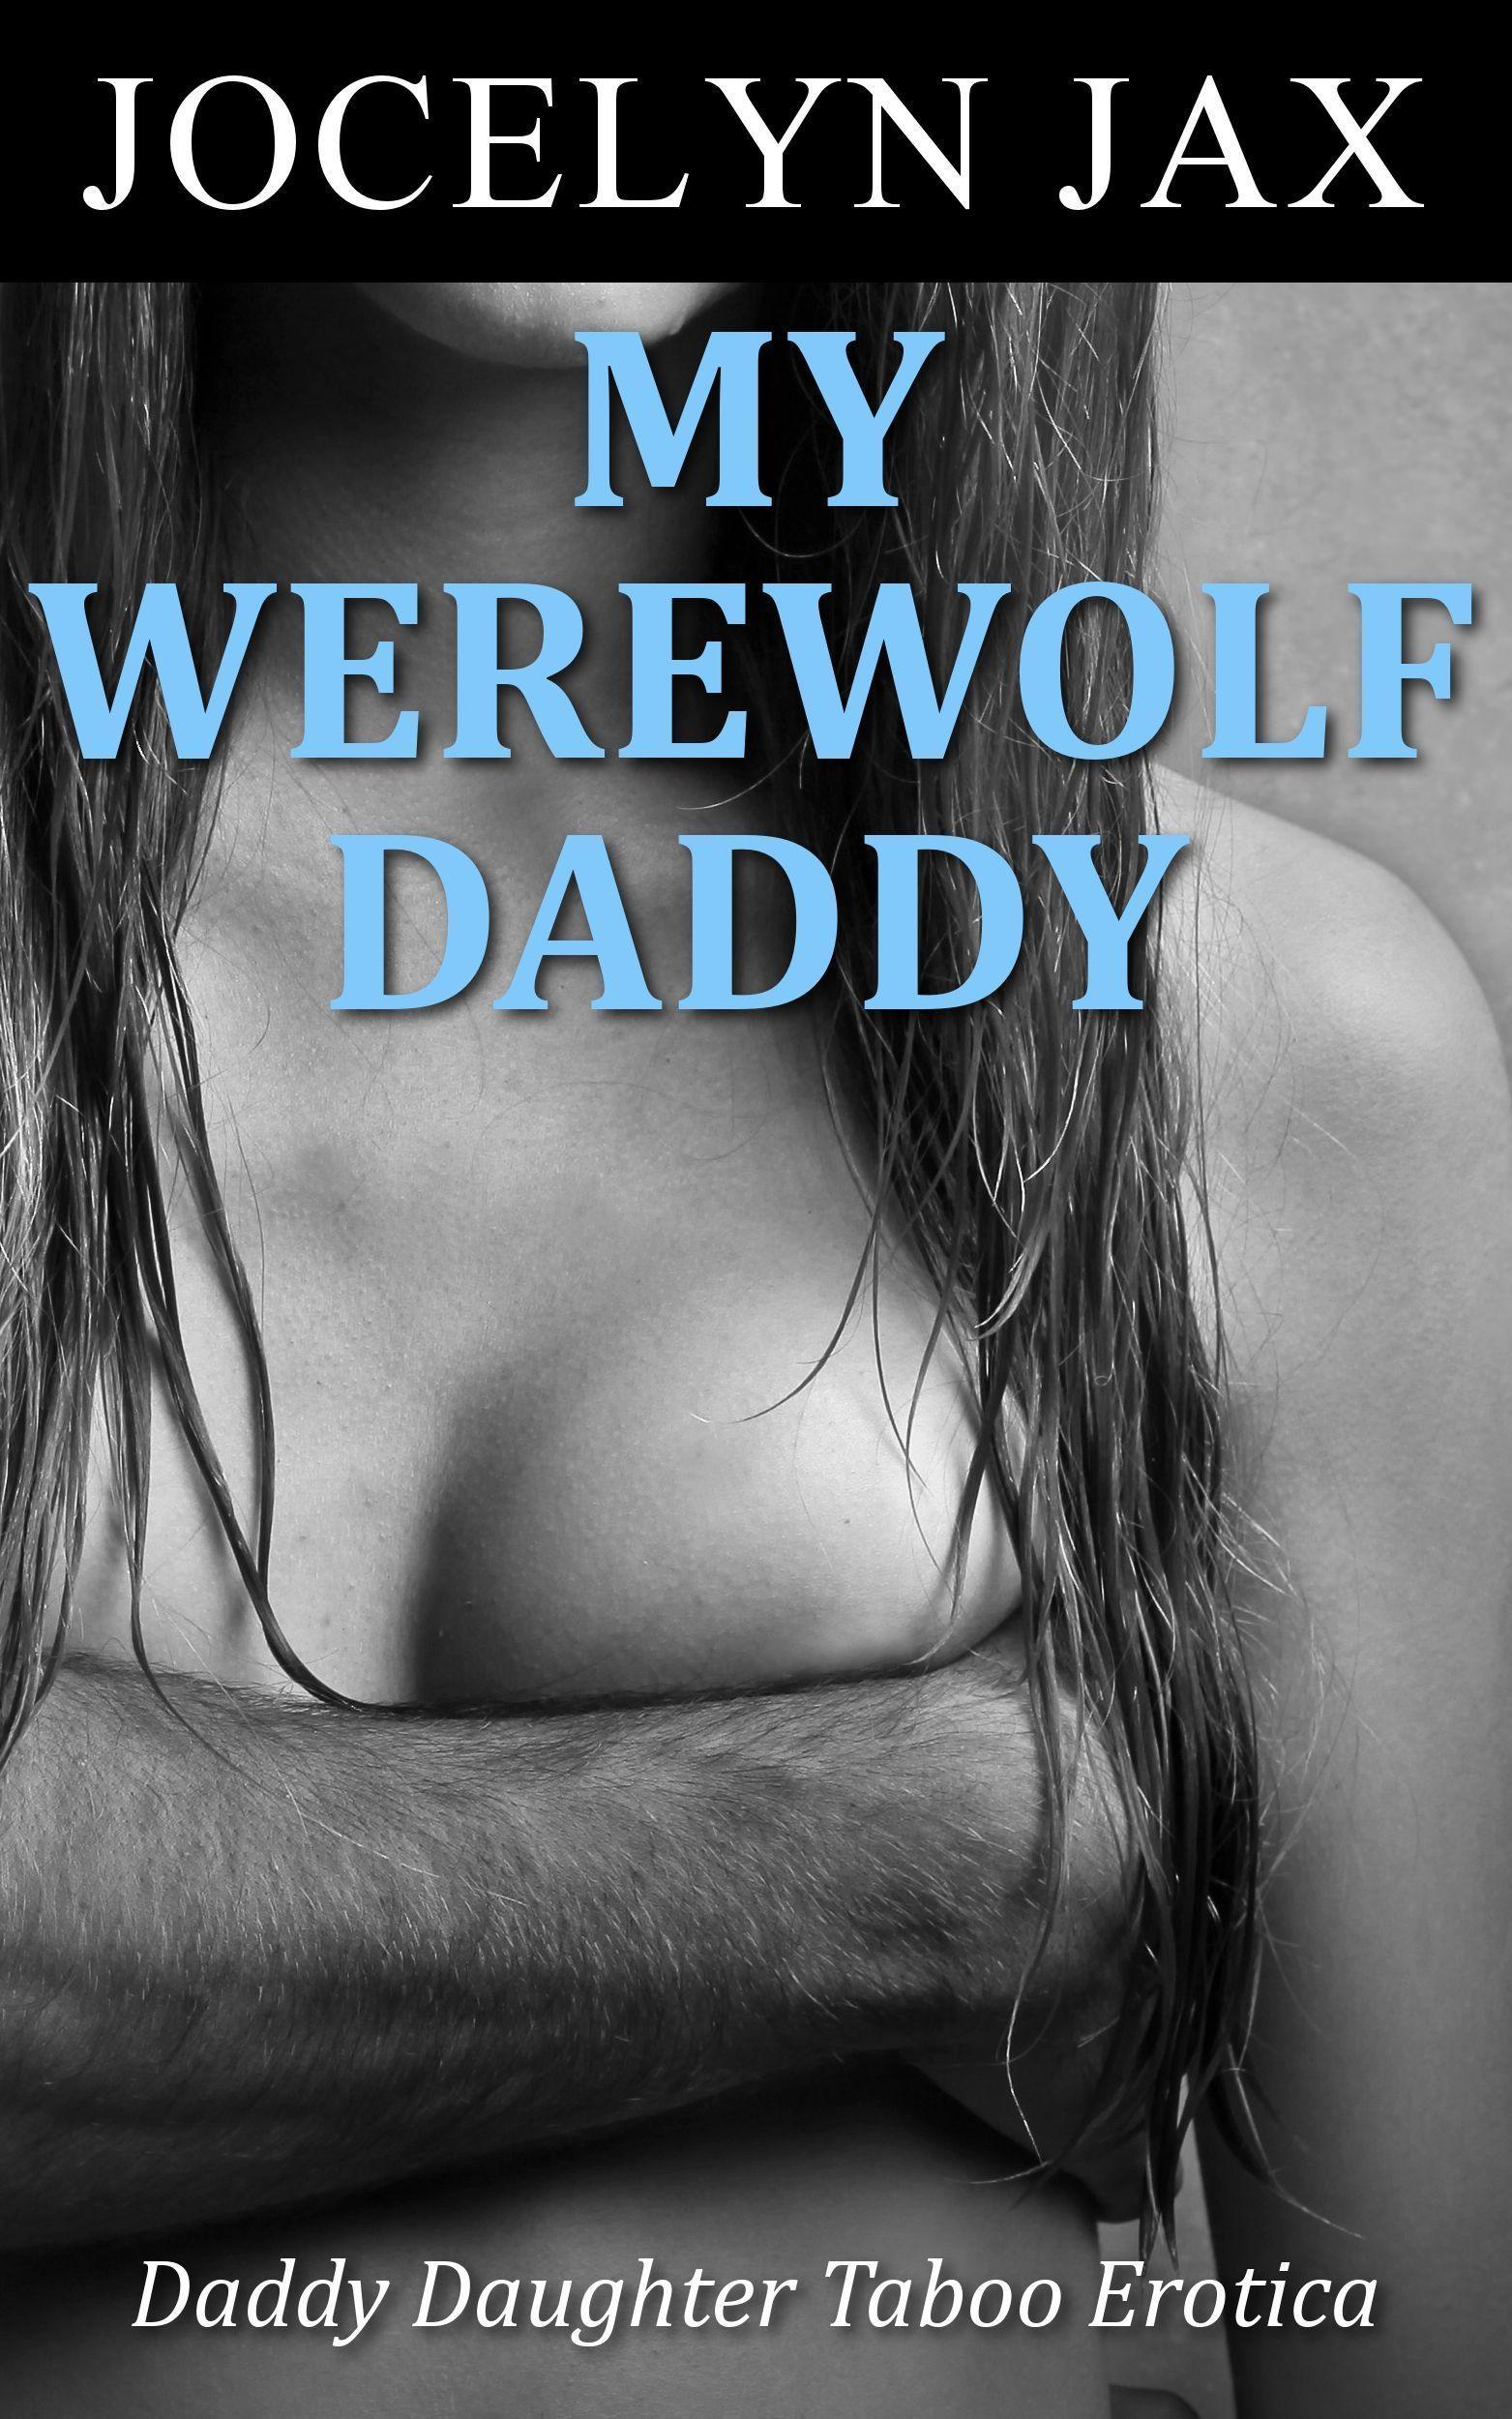 Erotic fiction father daughter